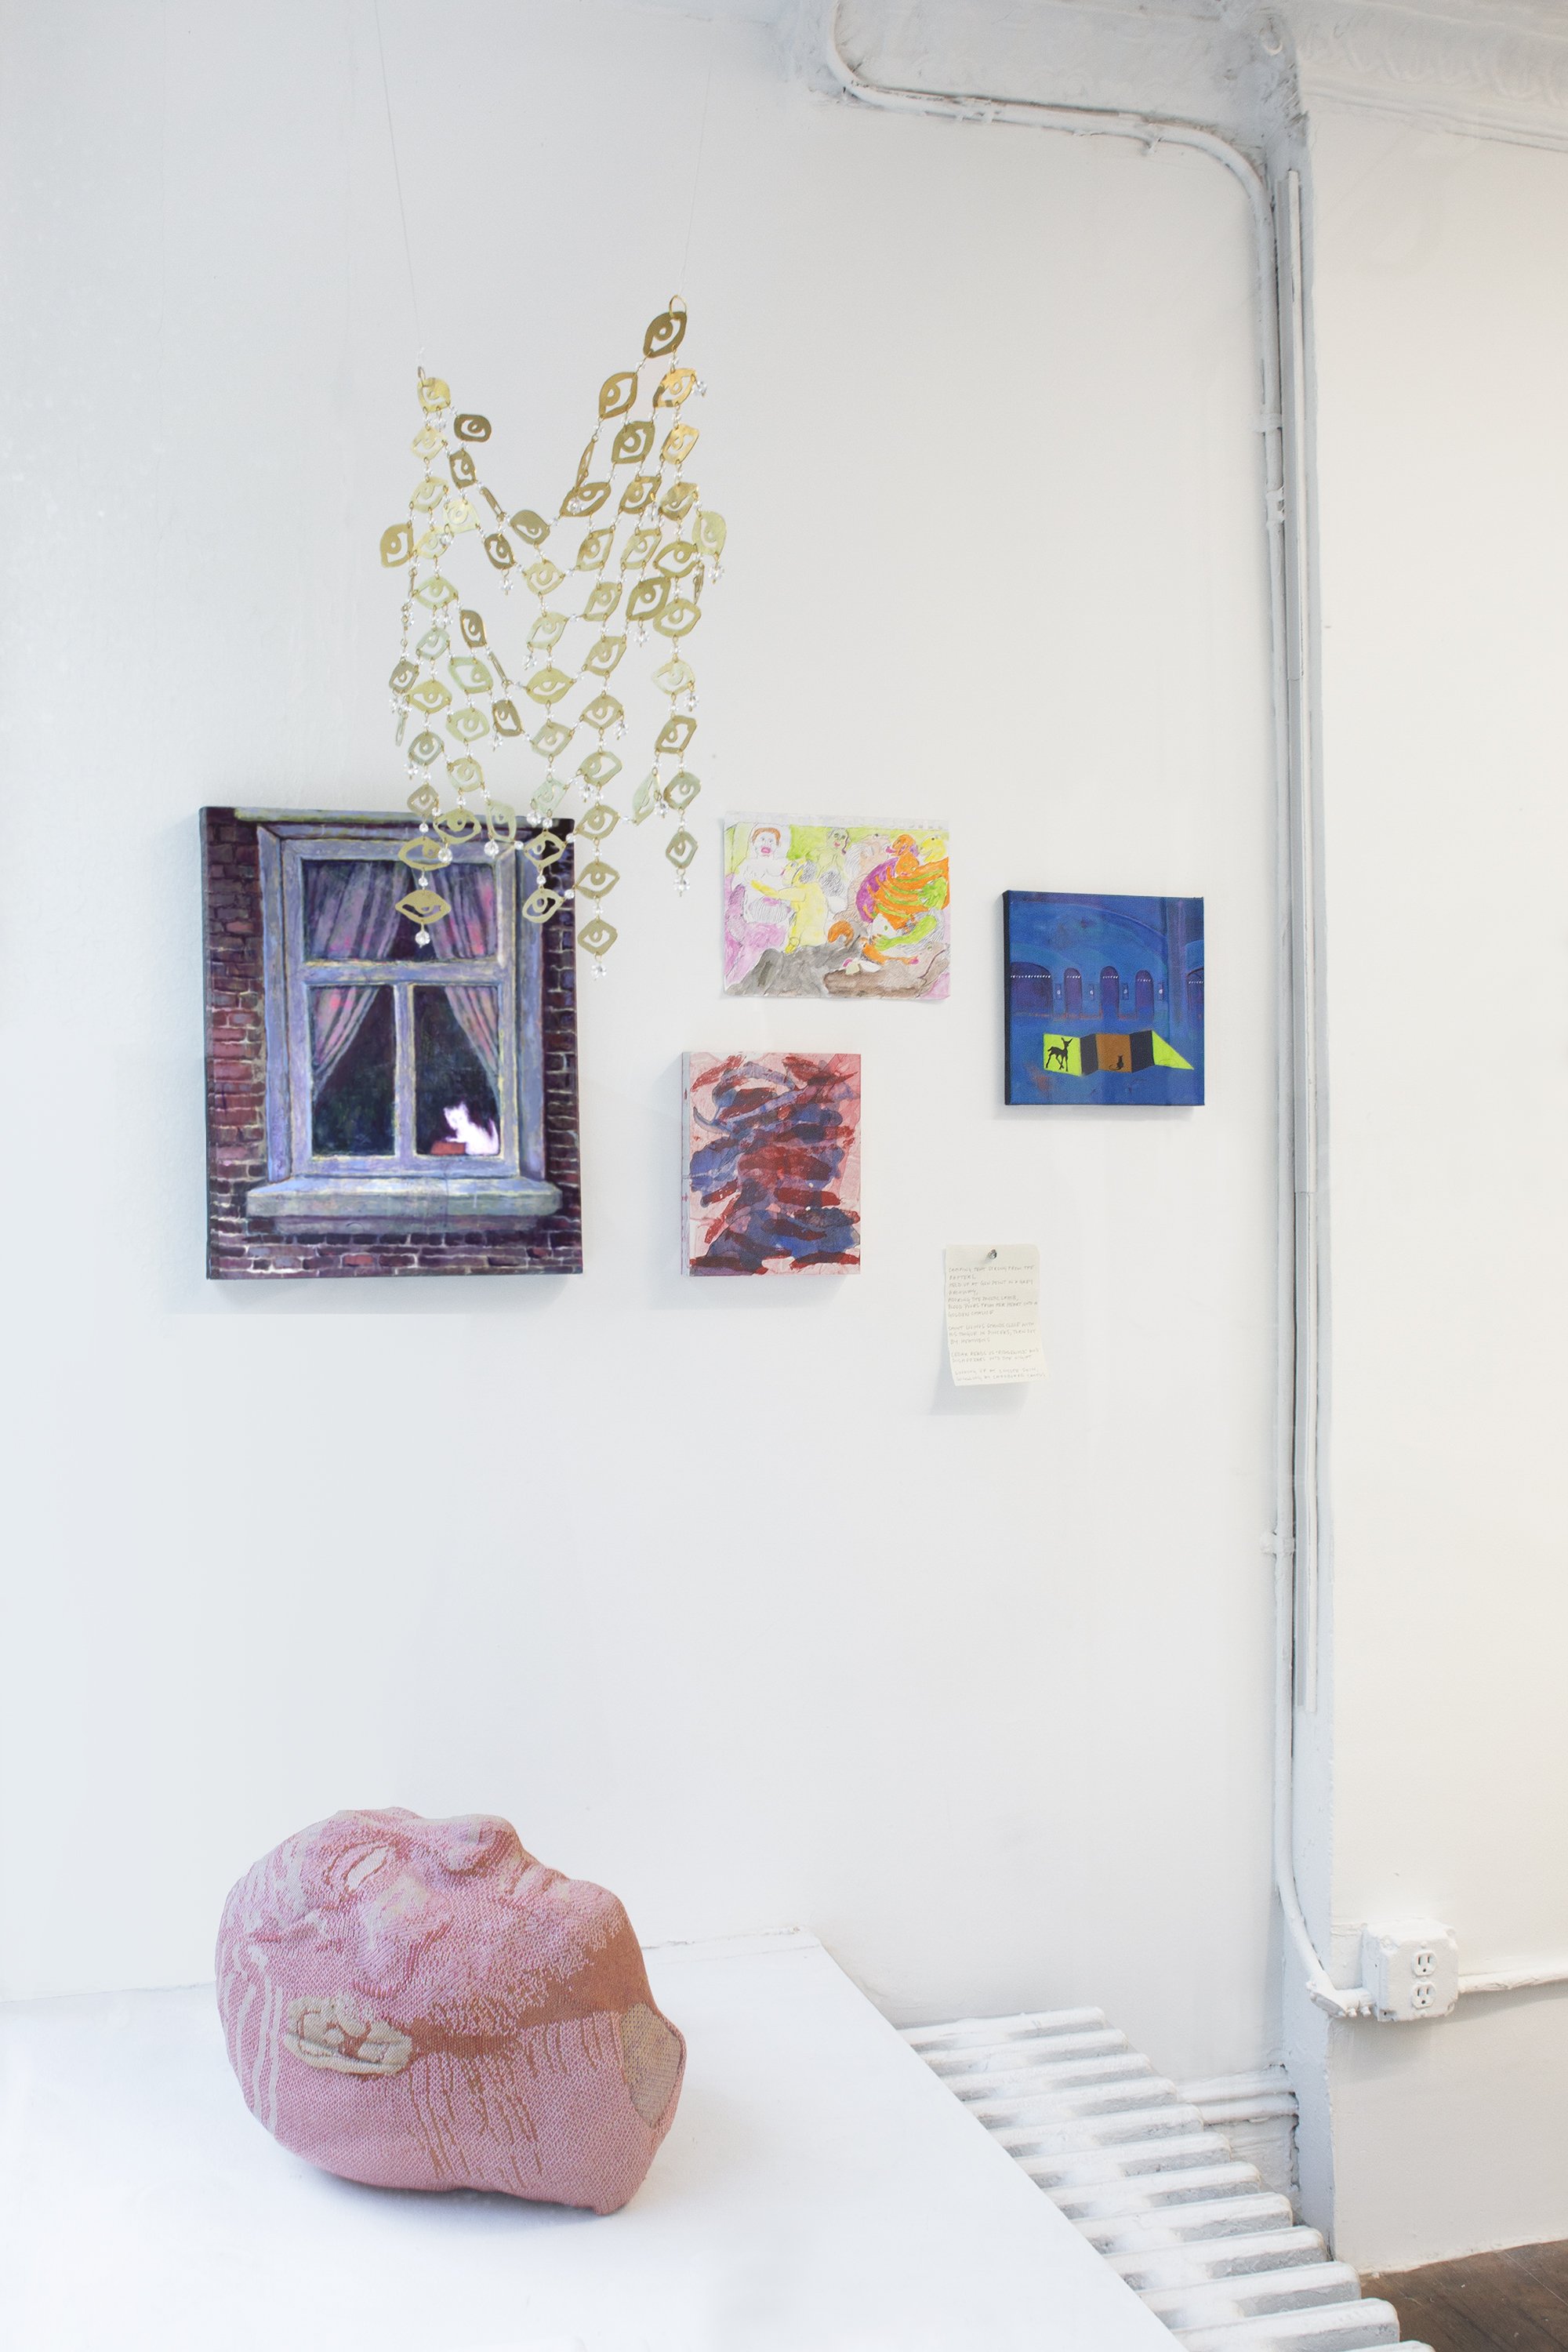  Installation view, Family Style, SITUATIONS, New York, NY, July 12 - August 4, 2023.  